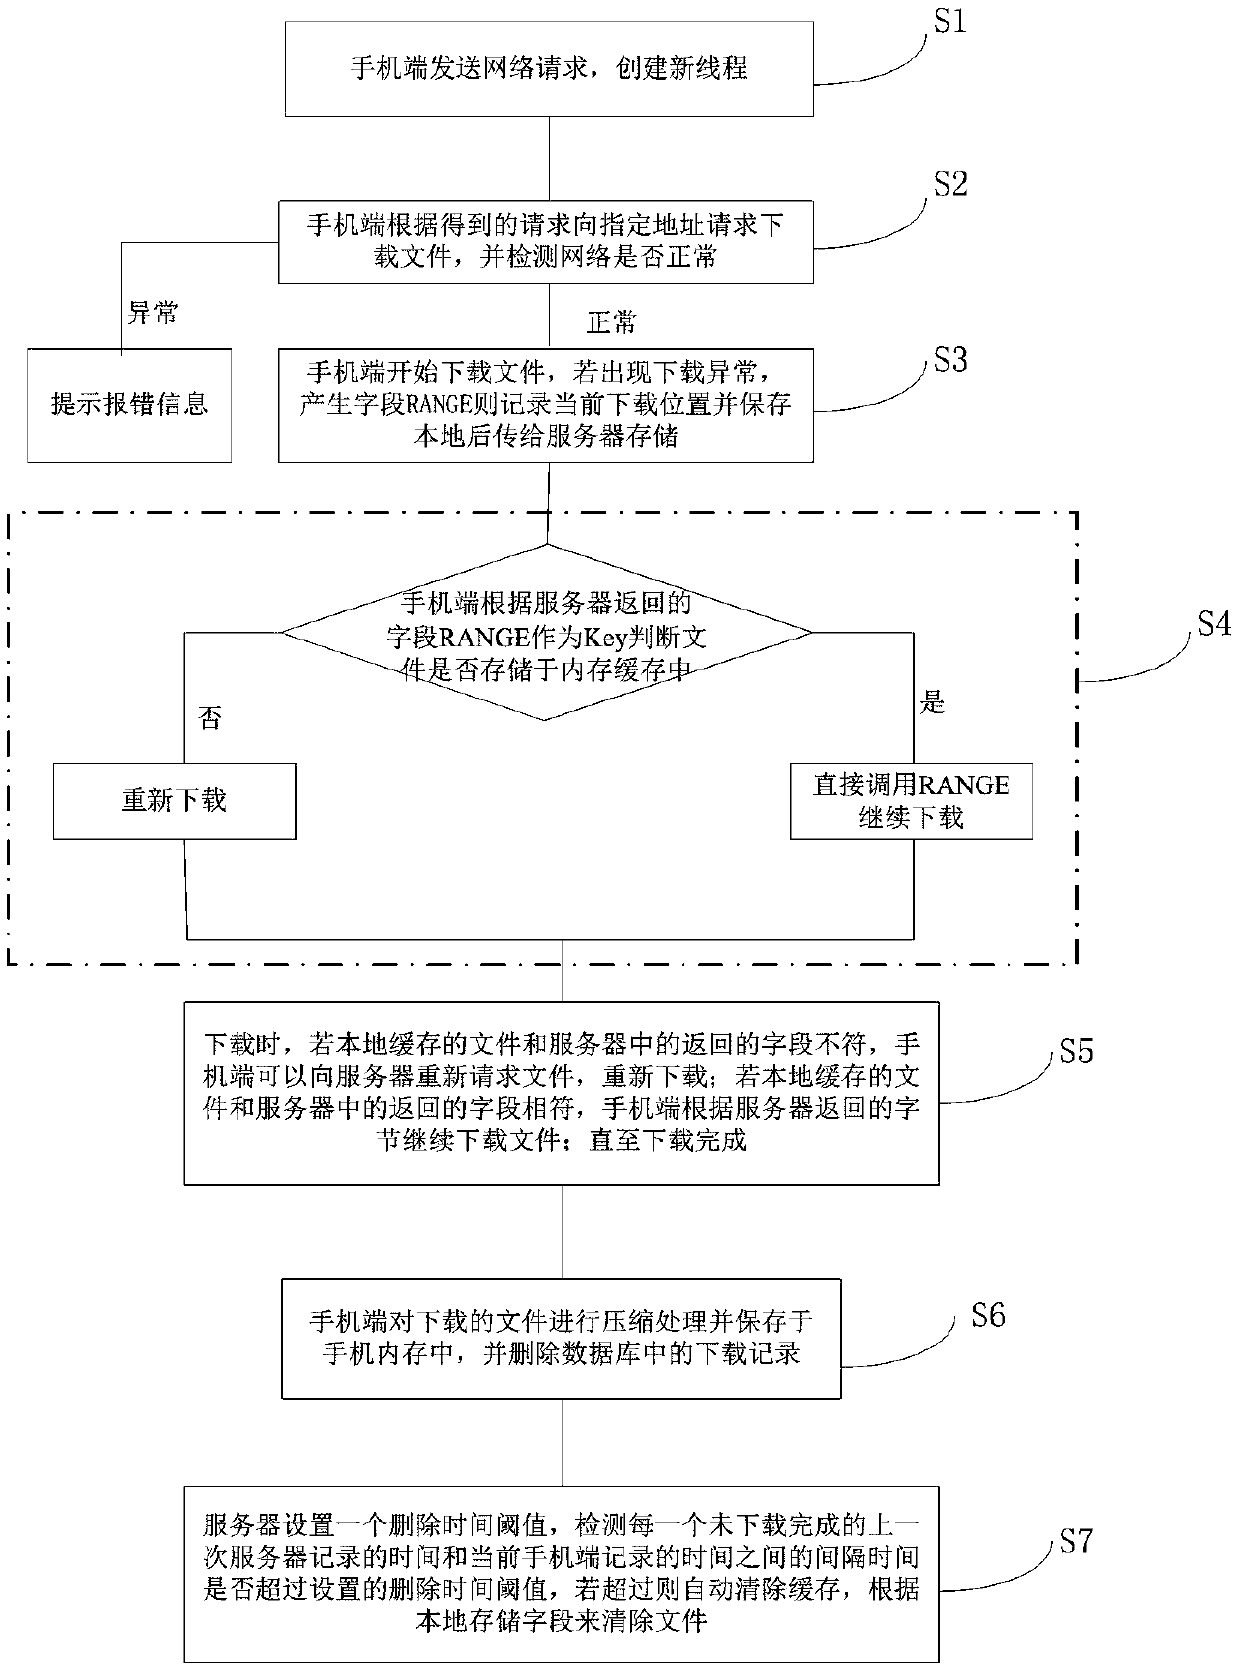 File breakpoint continuous transmission method based on iOS network